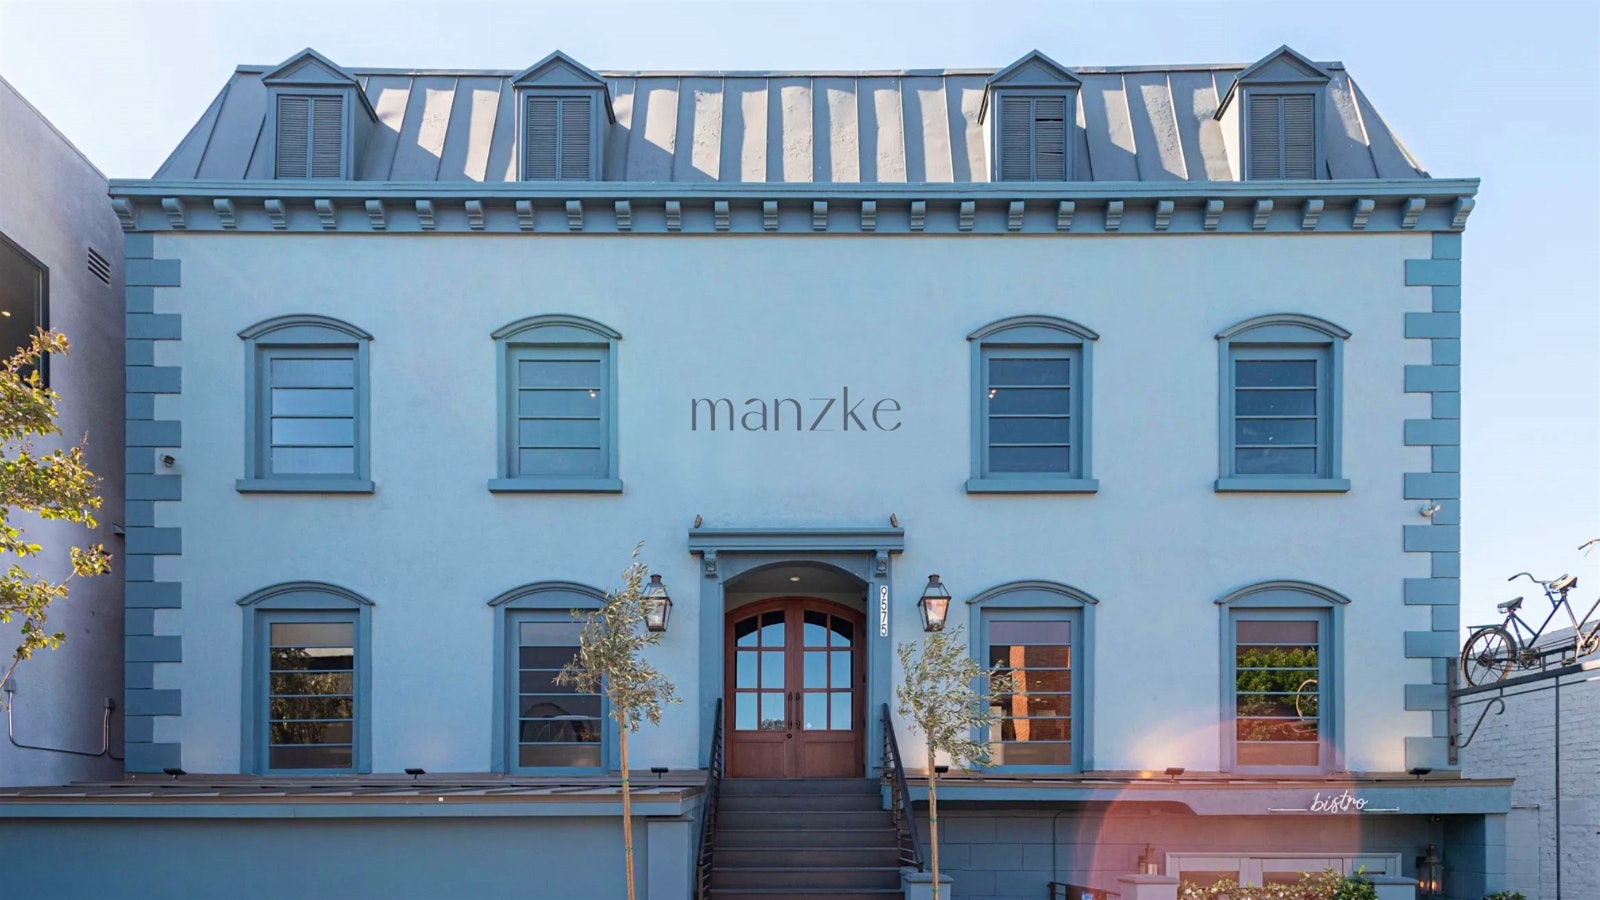  The exterior of Manzke restuarant and Bicyclette bistro in Los Angeles